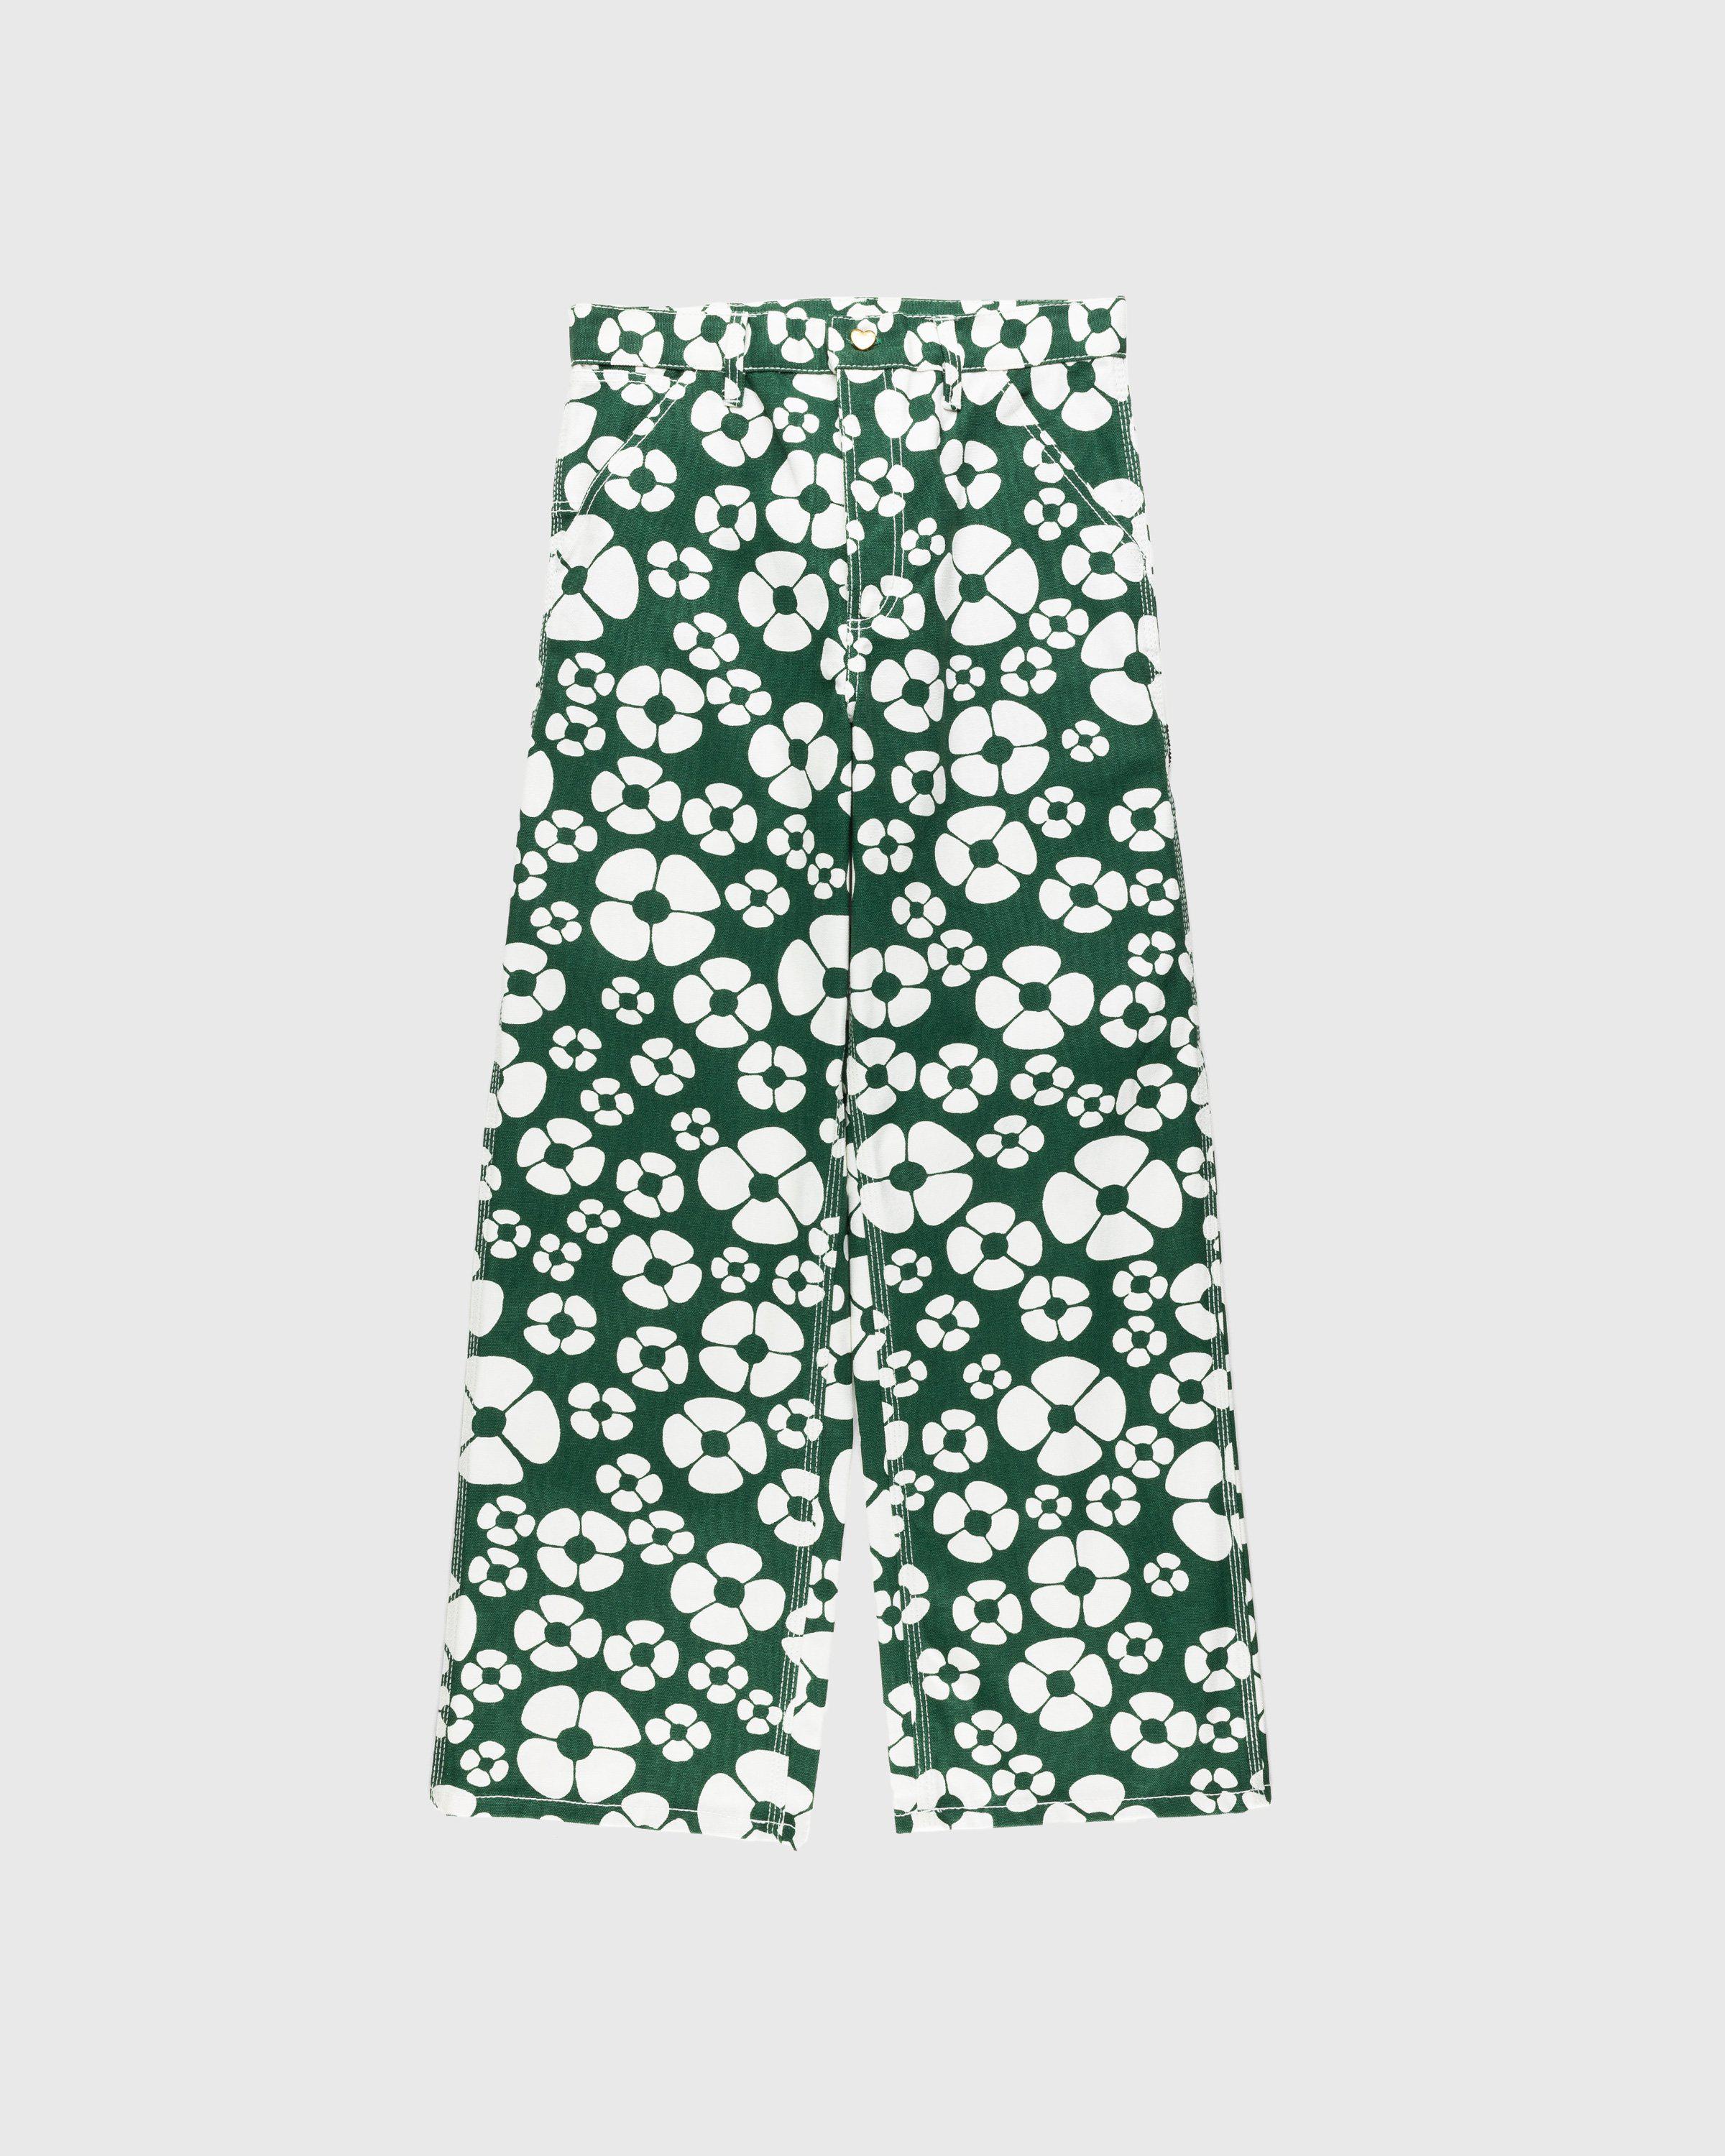 Marni x Carhartt WIP – Floral Trousers Green by MARNI X CARHARTT WIP